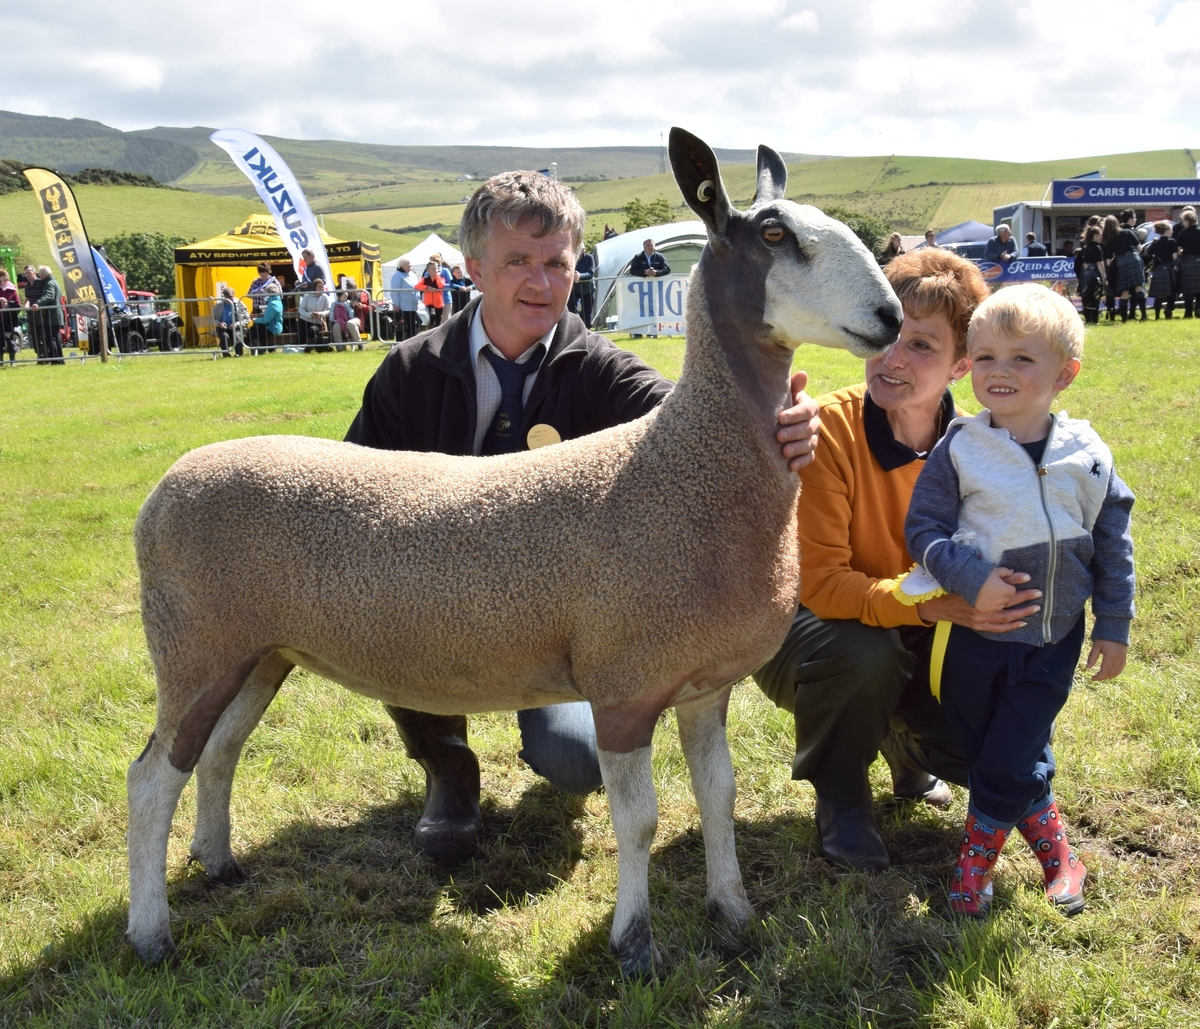 Hopes high for 'normal' agricultural show